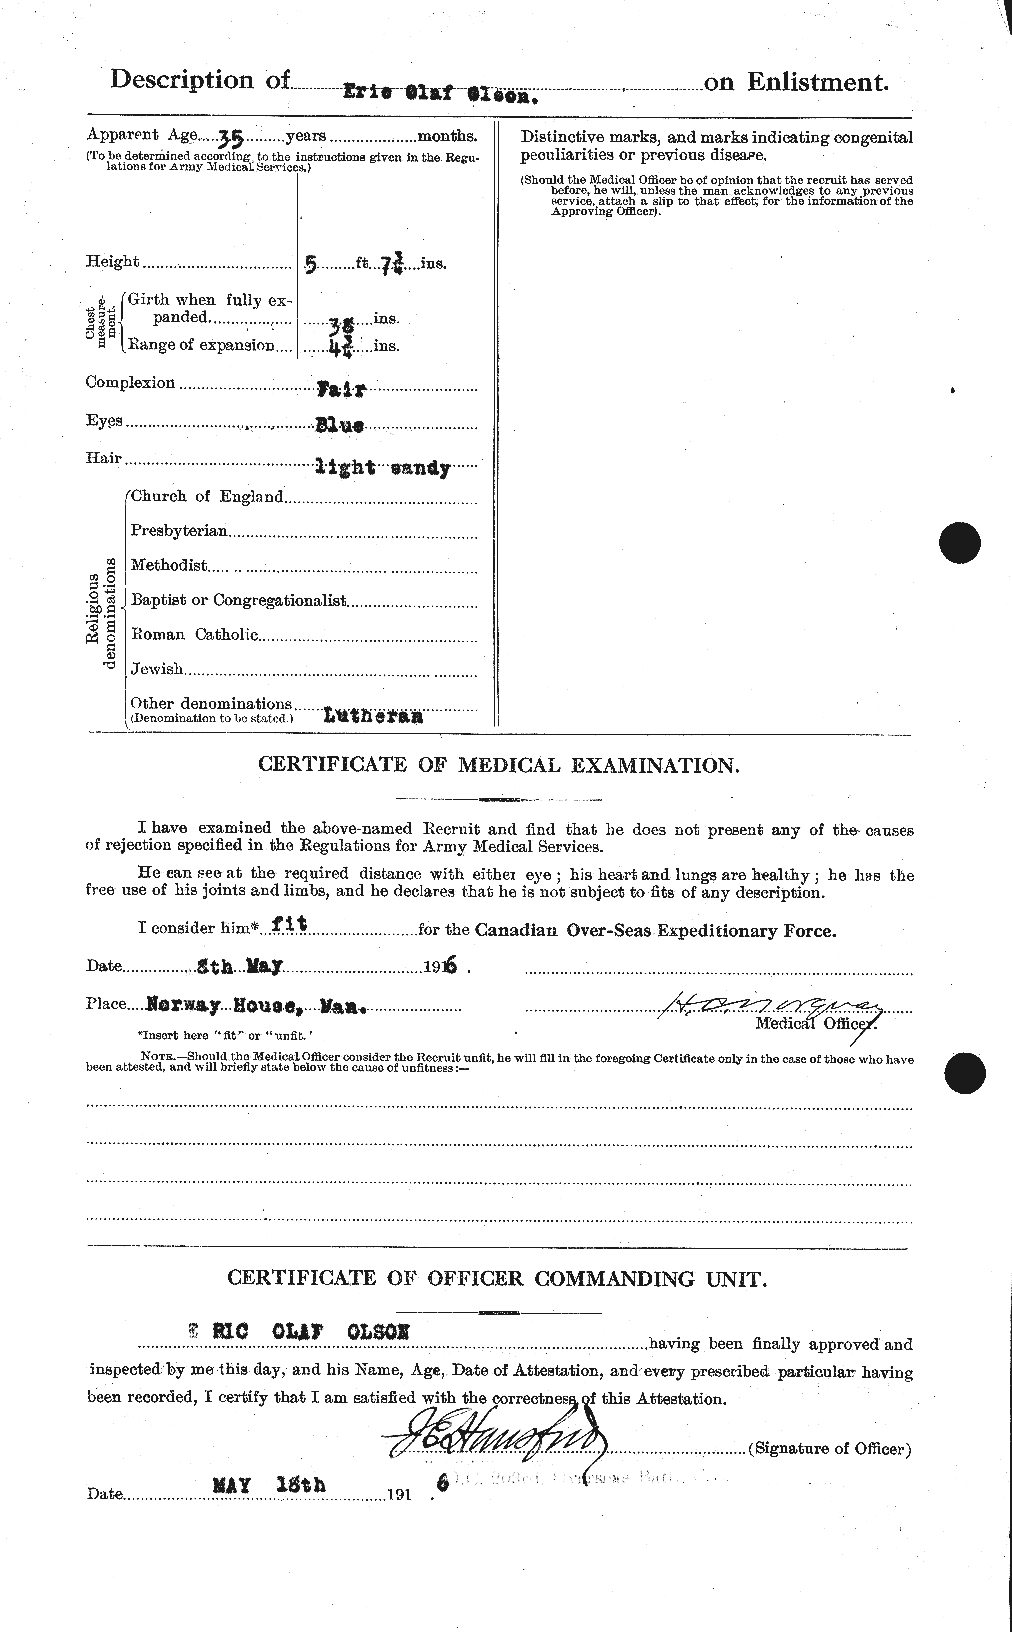 Personnel Records of the First World War - CEF 557199b